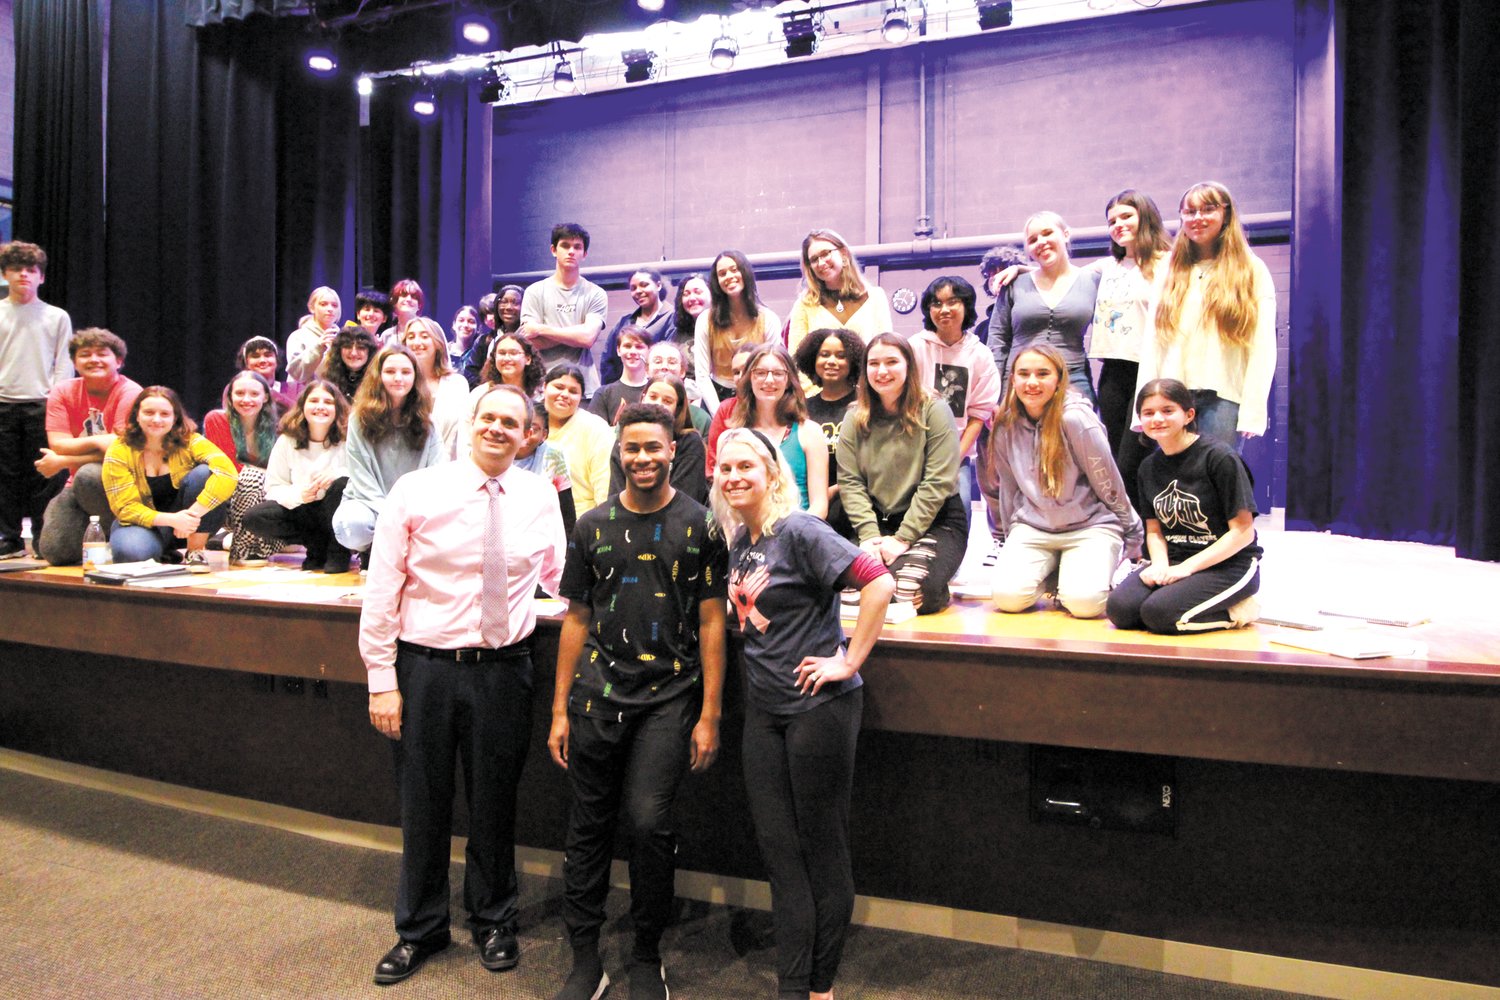 MENTORS AND STUDENTS: Broadway performer Michael Harmon is flanked by those who instructed him while a student in Pilgrim, Richard Denningham and Jenna Tremblay Reilly as the cast of the Pilgrim Players production of Rock of Ages gather on stage.